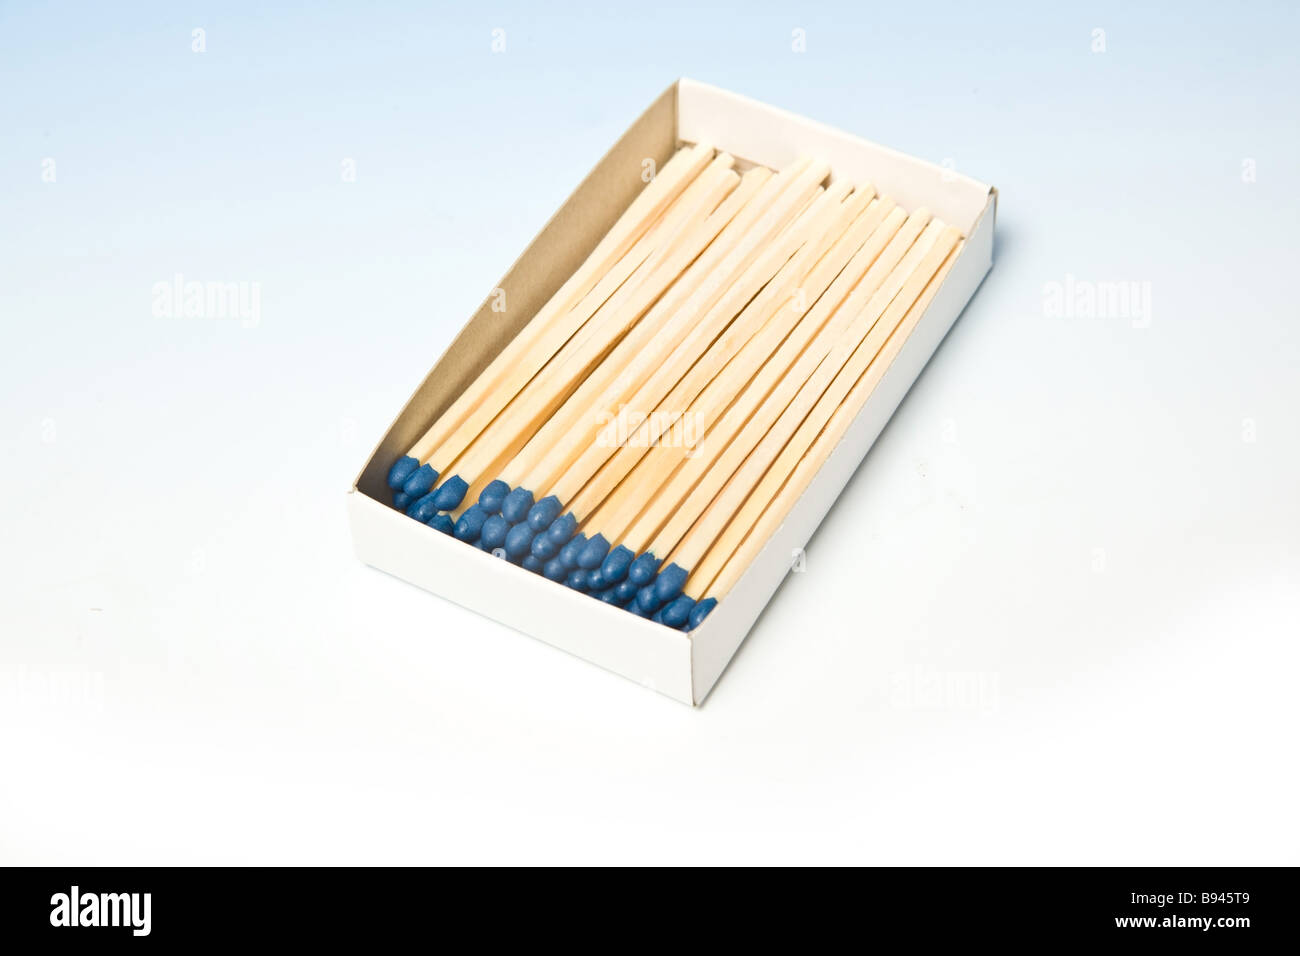 Box of matches on a graduated blue studio background. Stock Photo